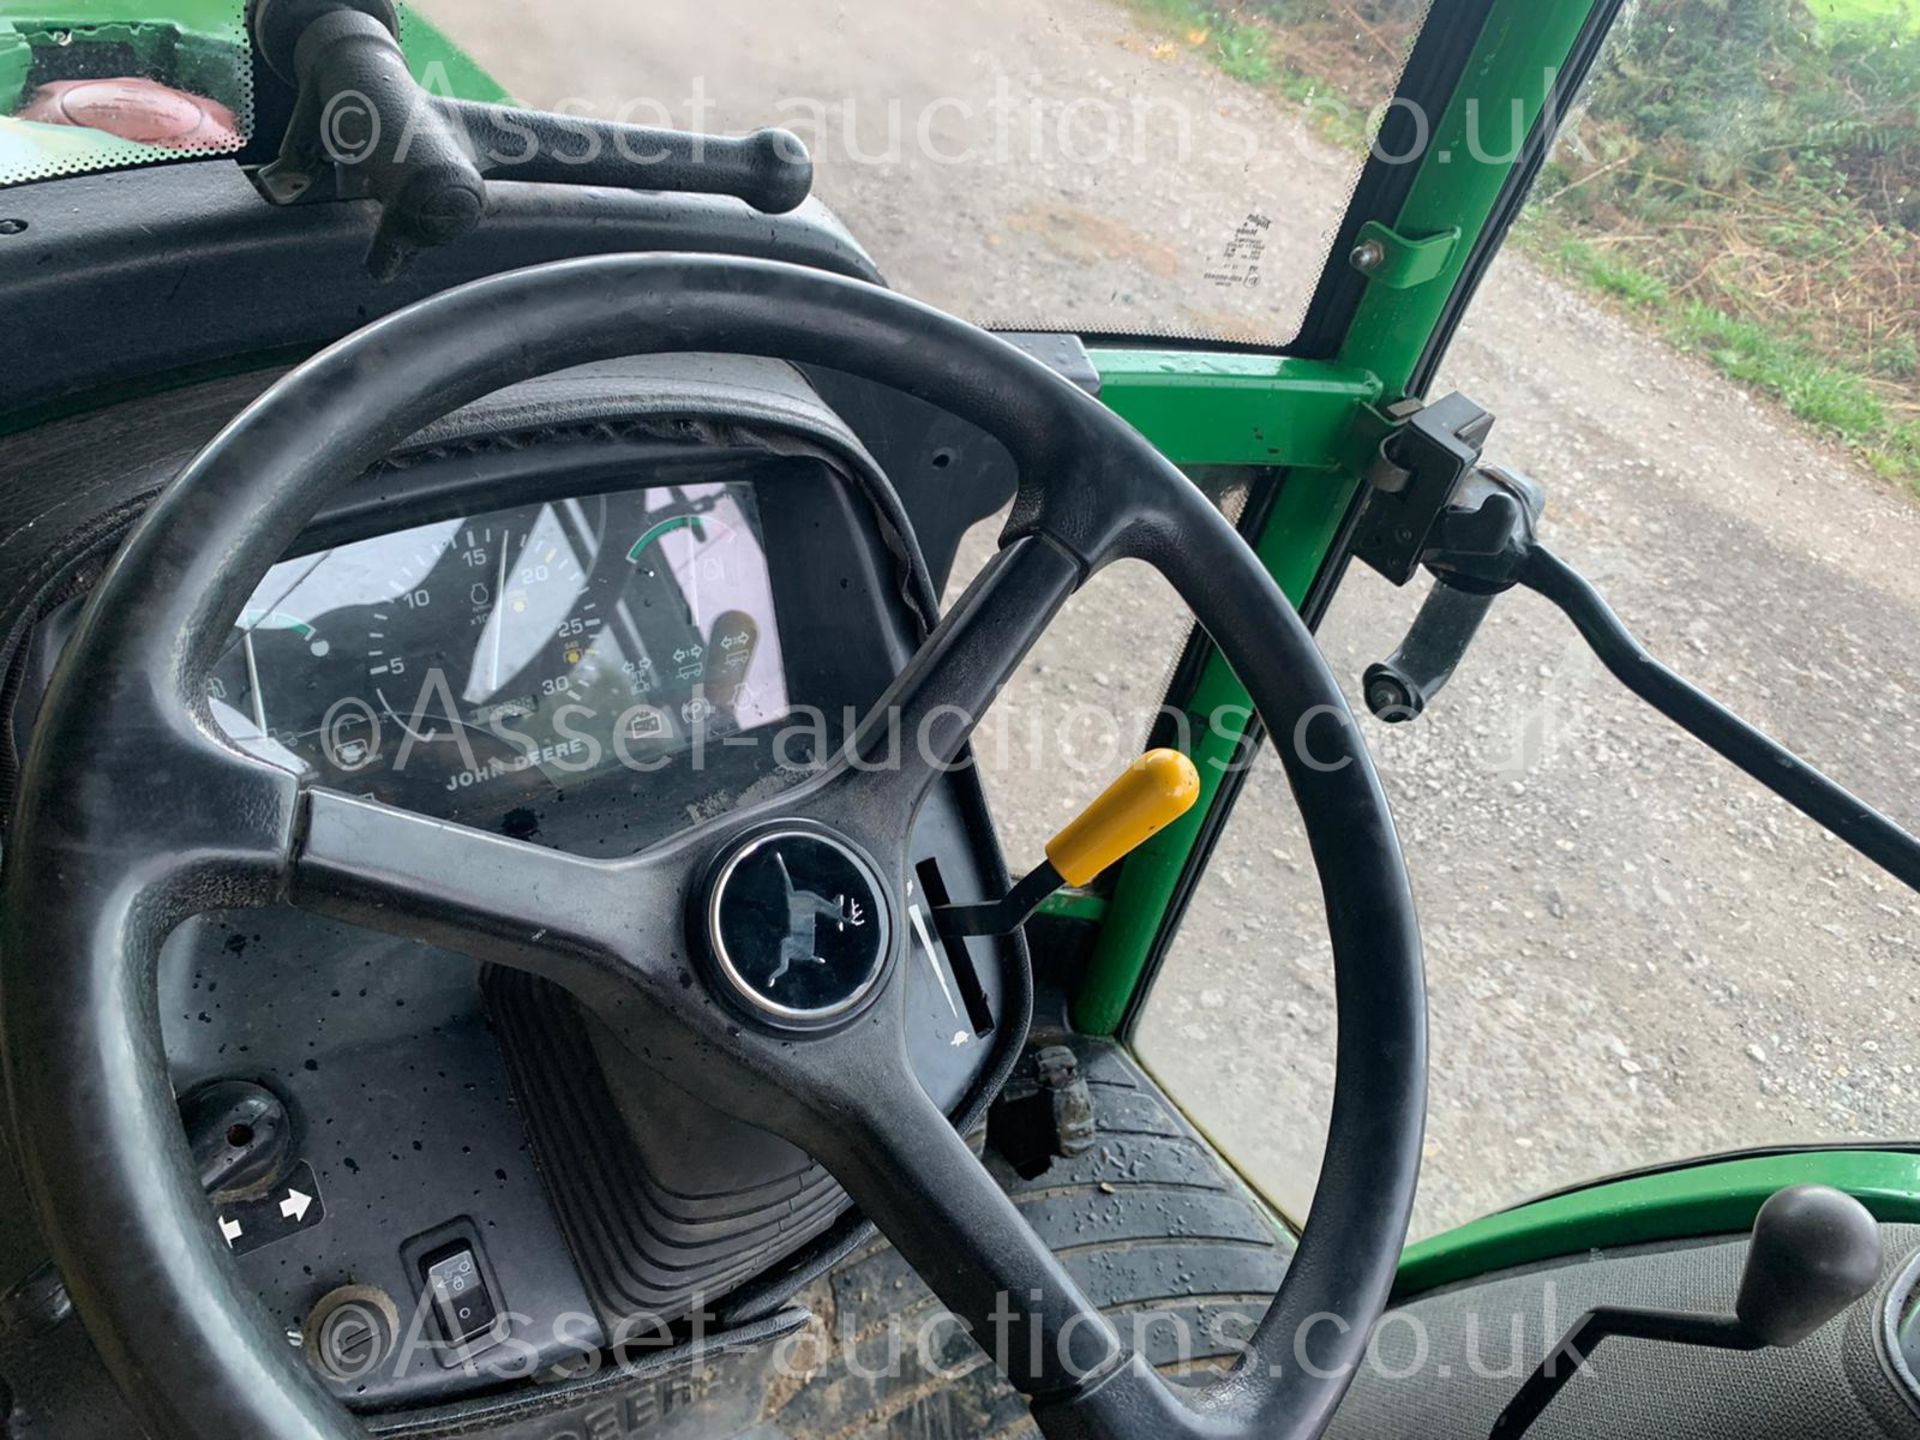 JOHN DEERE 4300 32hp 4WD COMPACT TRACTOR, RUNS DRIVES AND WORKS, CABBED, REAR TOW, ROAD KIT - Image 9 of 9